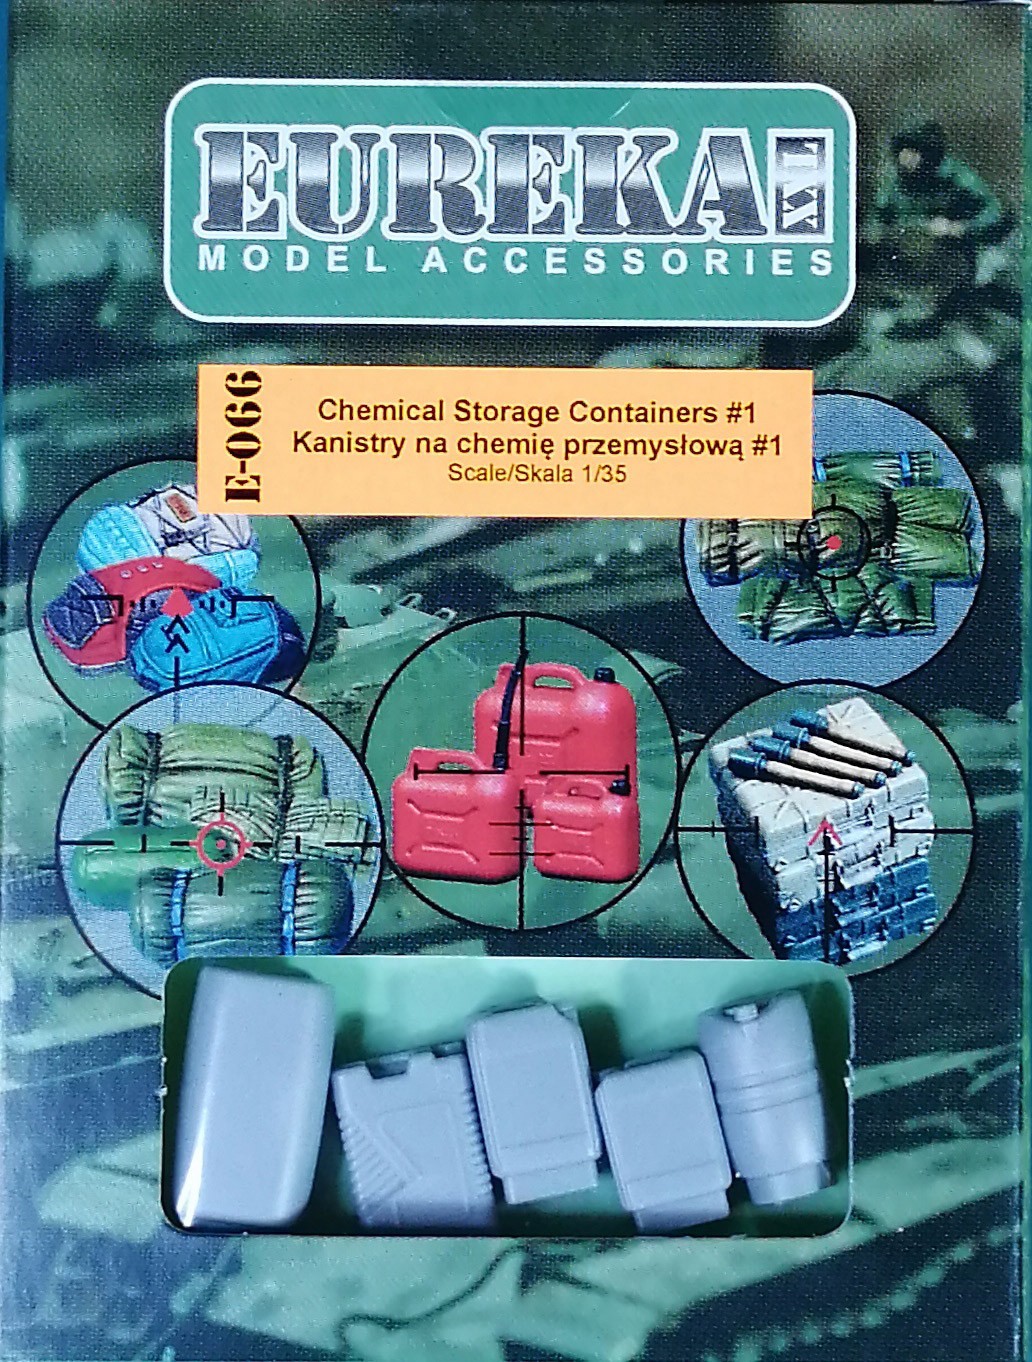 E-066 Chemical Storage Containers #1. Set contains 5 resin elements and decal sheet in 1/35 scale